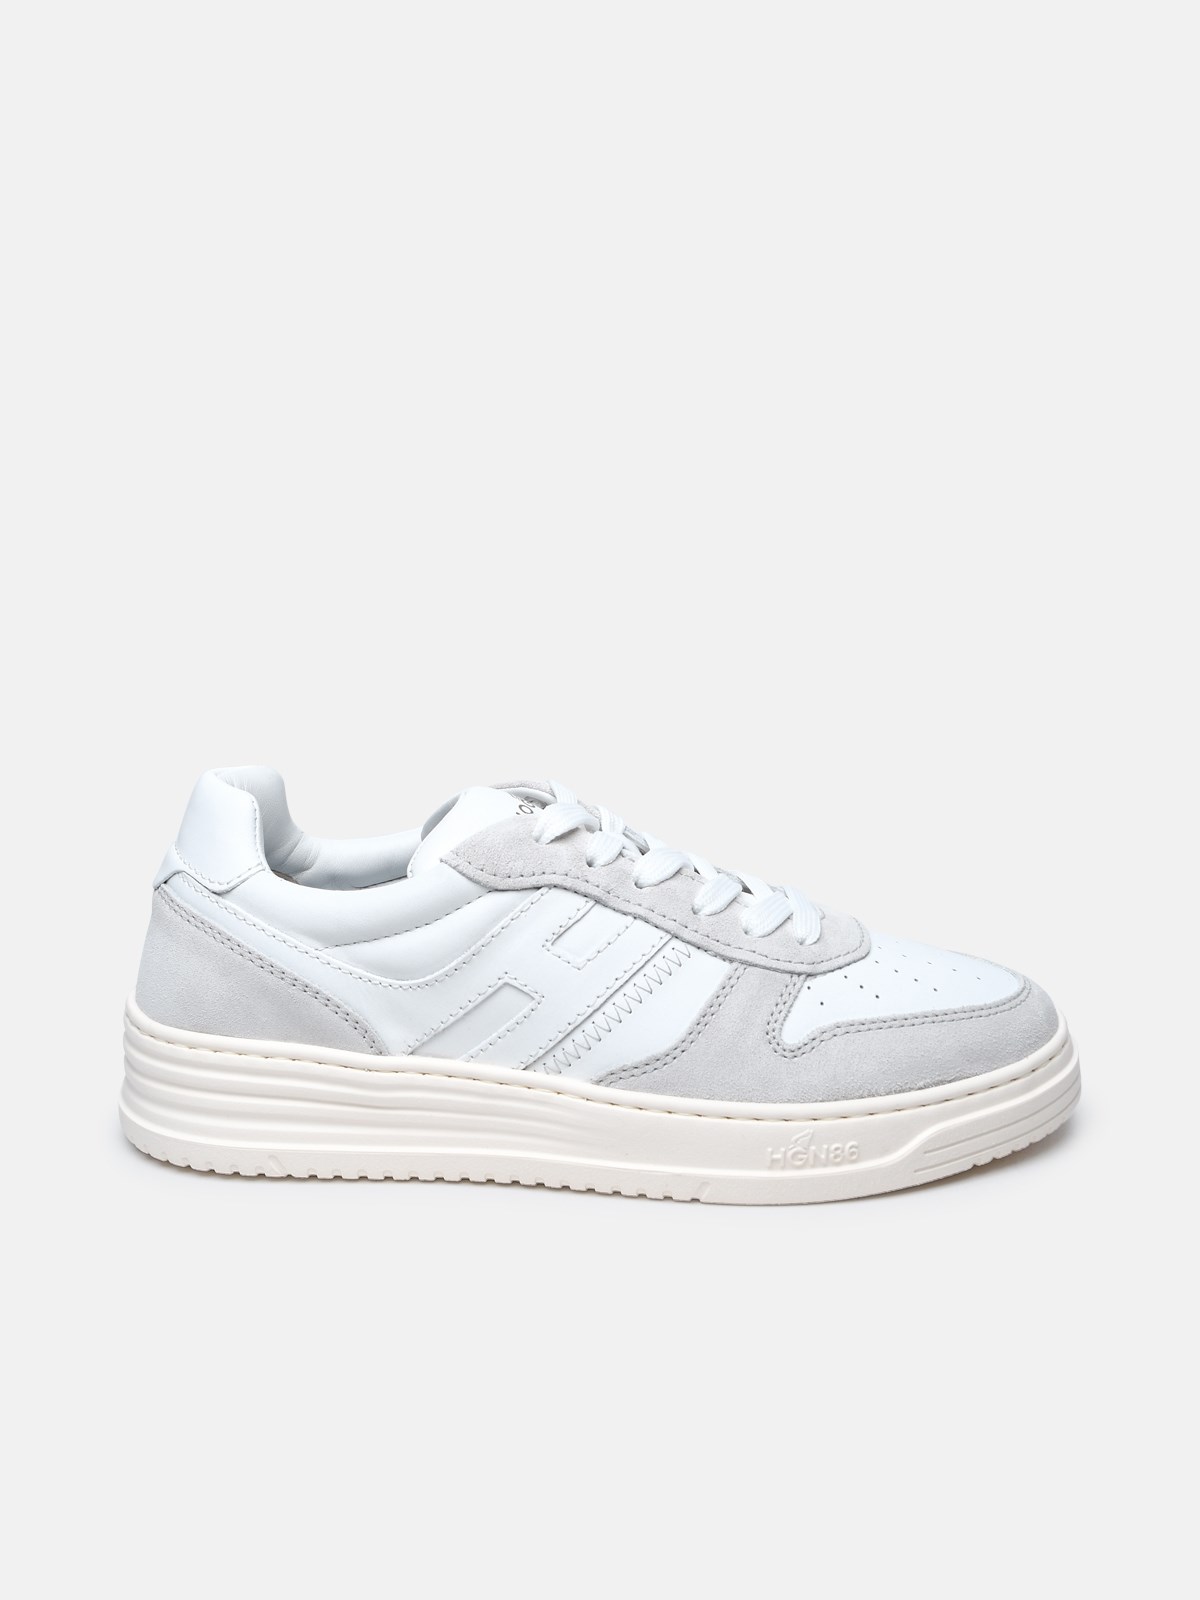 Hogan H630 White Leather Sneakers